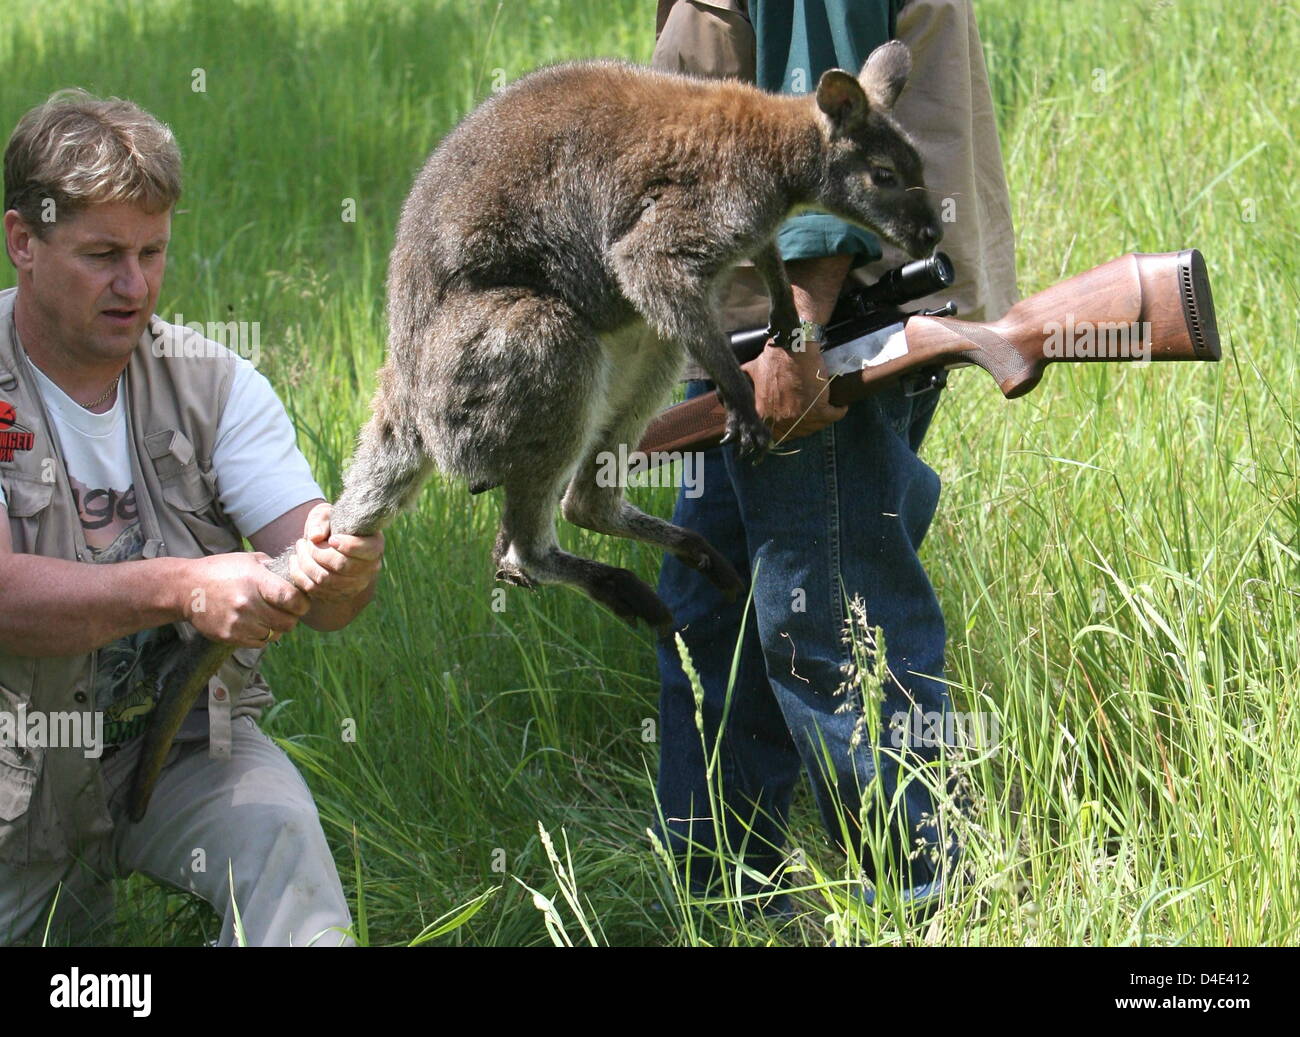 Animal keeper Tam Barras of 'Serengeti-Tierpark' -zoo holds runaway kangaroo 'Toto' by its tale in a field in Wedemark near Hanover, Germany, 19 May 2008. Six year-old 'Toto' had escaped from the zoo by jumping over a fence two-and-a-half weeks ago. It was discovered about 35km away from the zoo. Photo: HOLGER HOLLEMANN Stock Photo